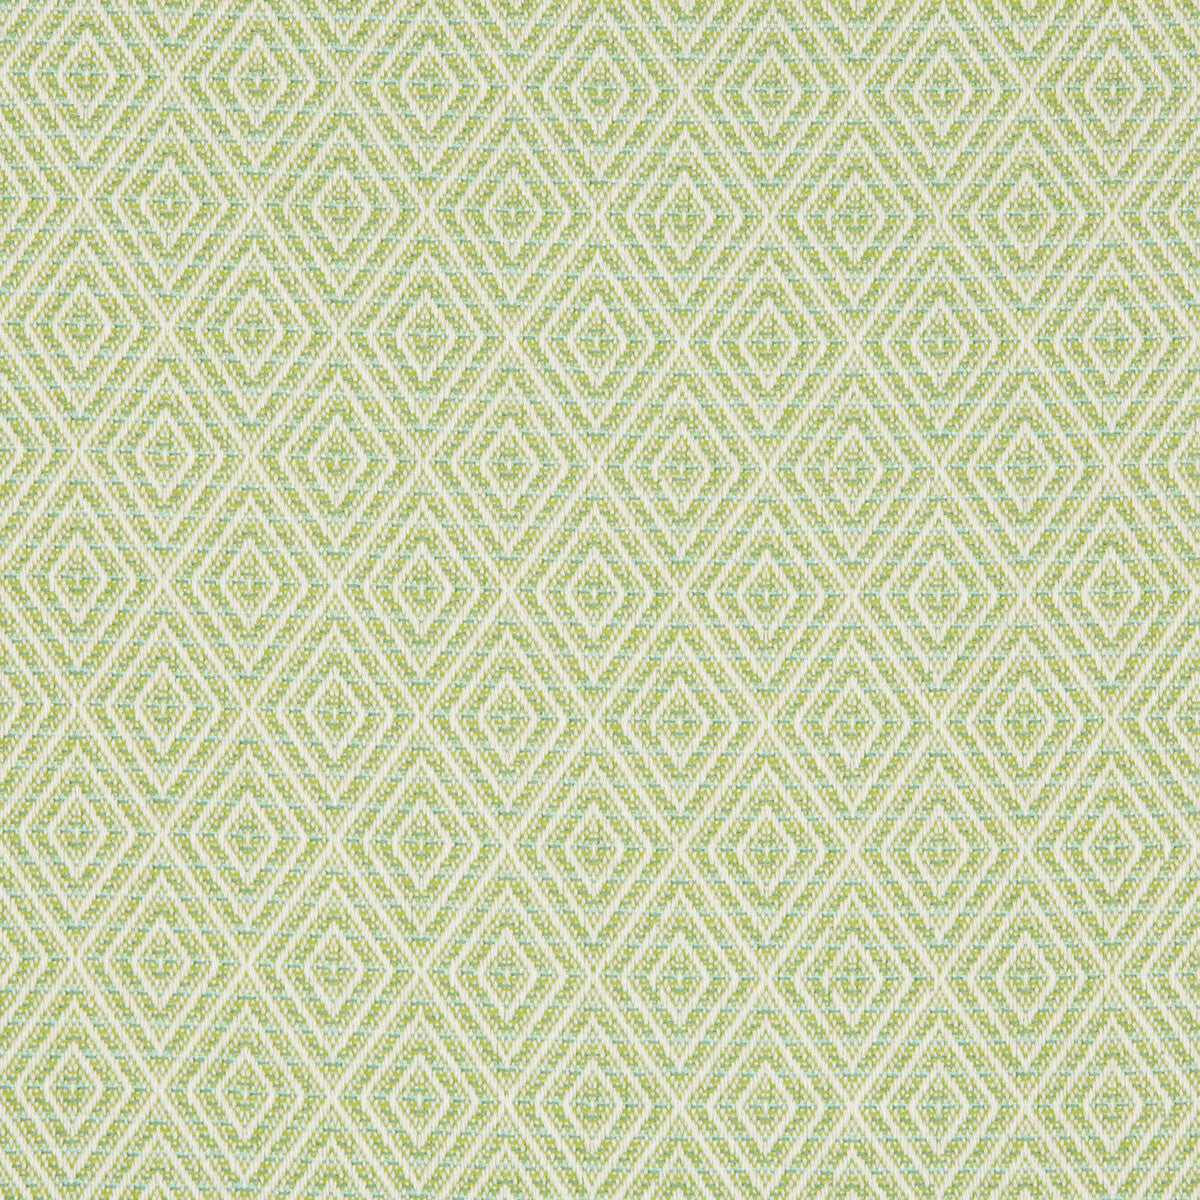 Grace Bay Woven fabric in kiwi color - pattern 8017152.3.0 - by Brunschwig &amp; Fils in the En Vacances collection